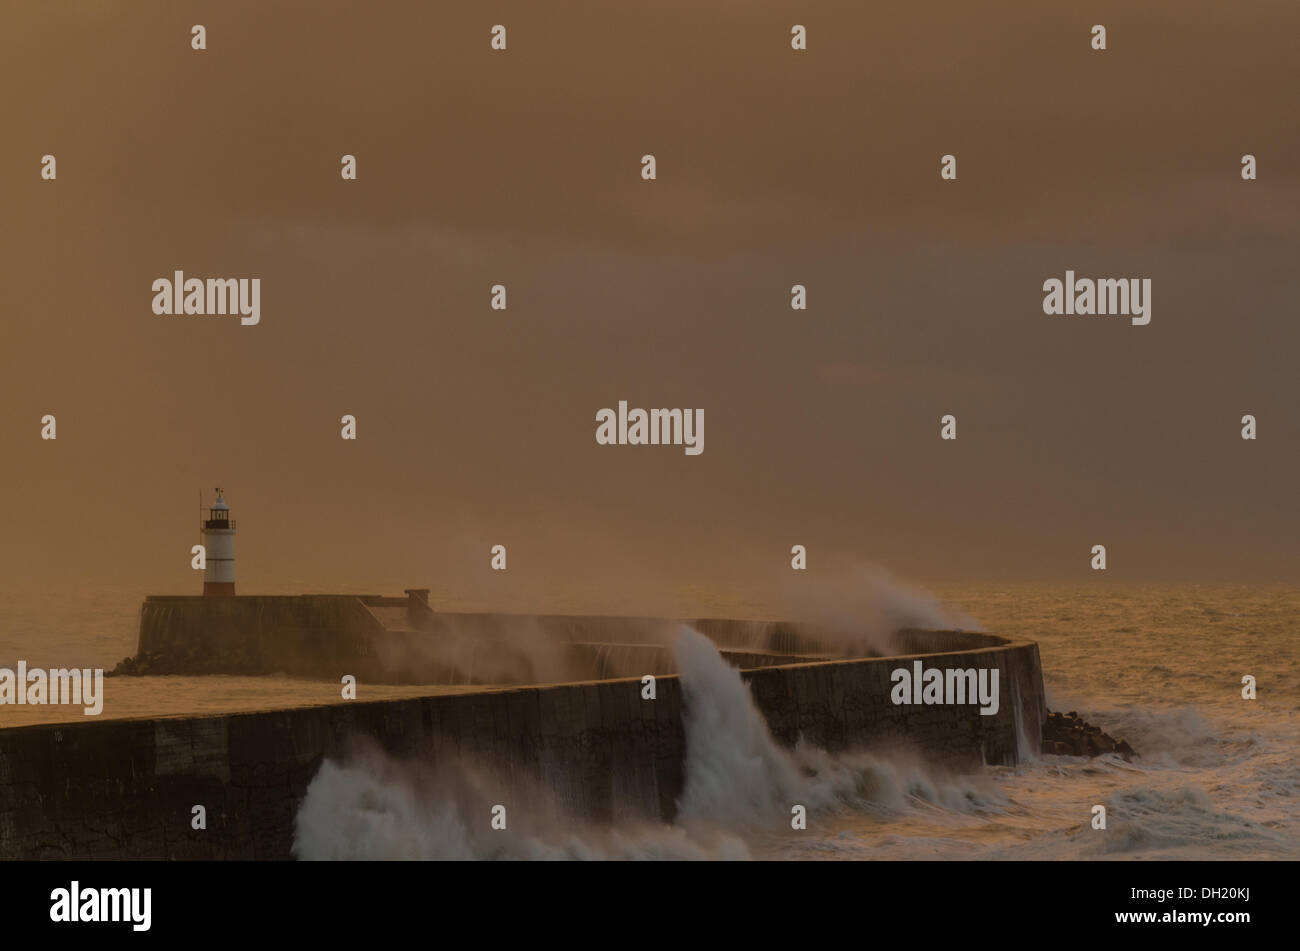 Newhaven, East Sussex, UK. 28th October 2013. Waves crashing at Newhaven, East Sussex during the St Jude storm just as the sun was setting. © mark upfield / Alamy Live News. Stock Photo